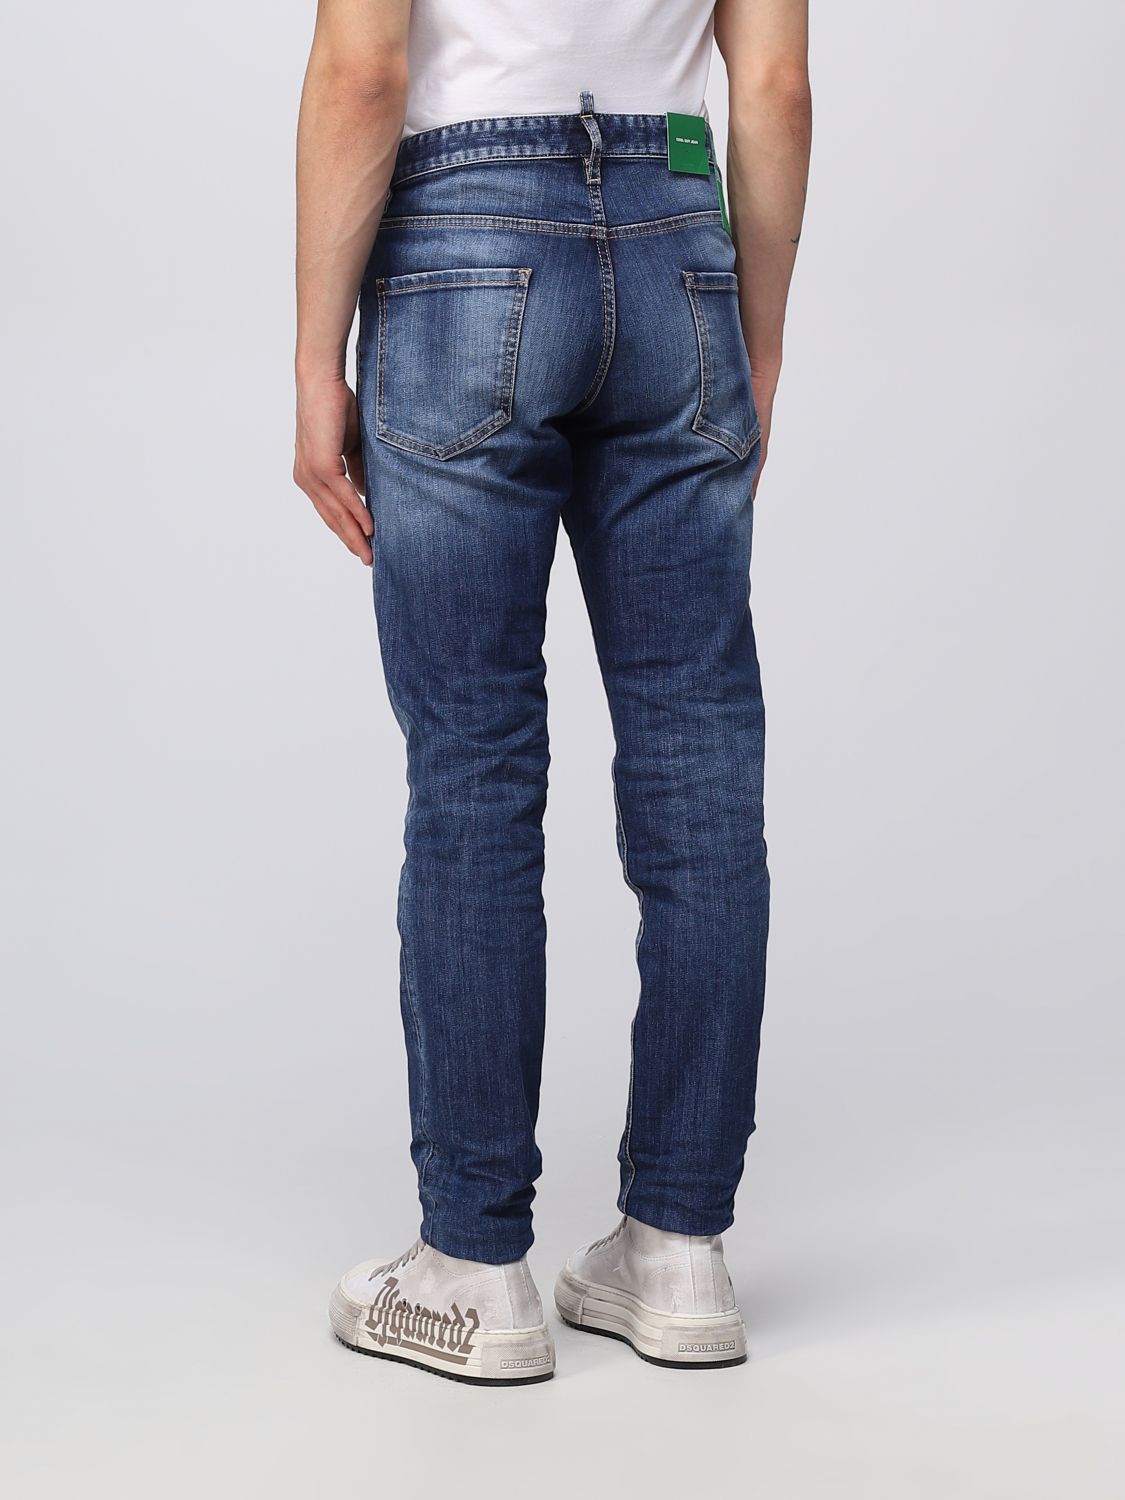 Jeans Dsquared2: Jeans Dsquared2 in denim blue navy 2